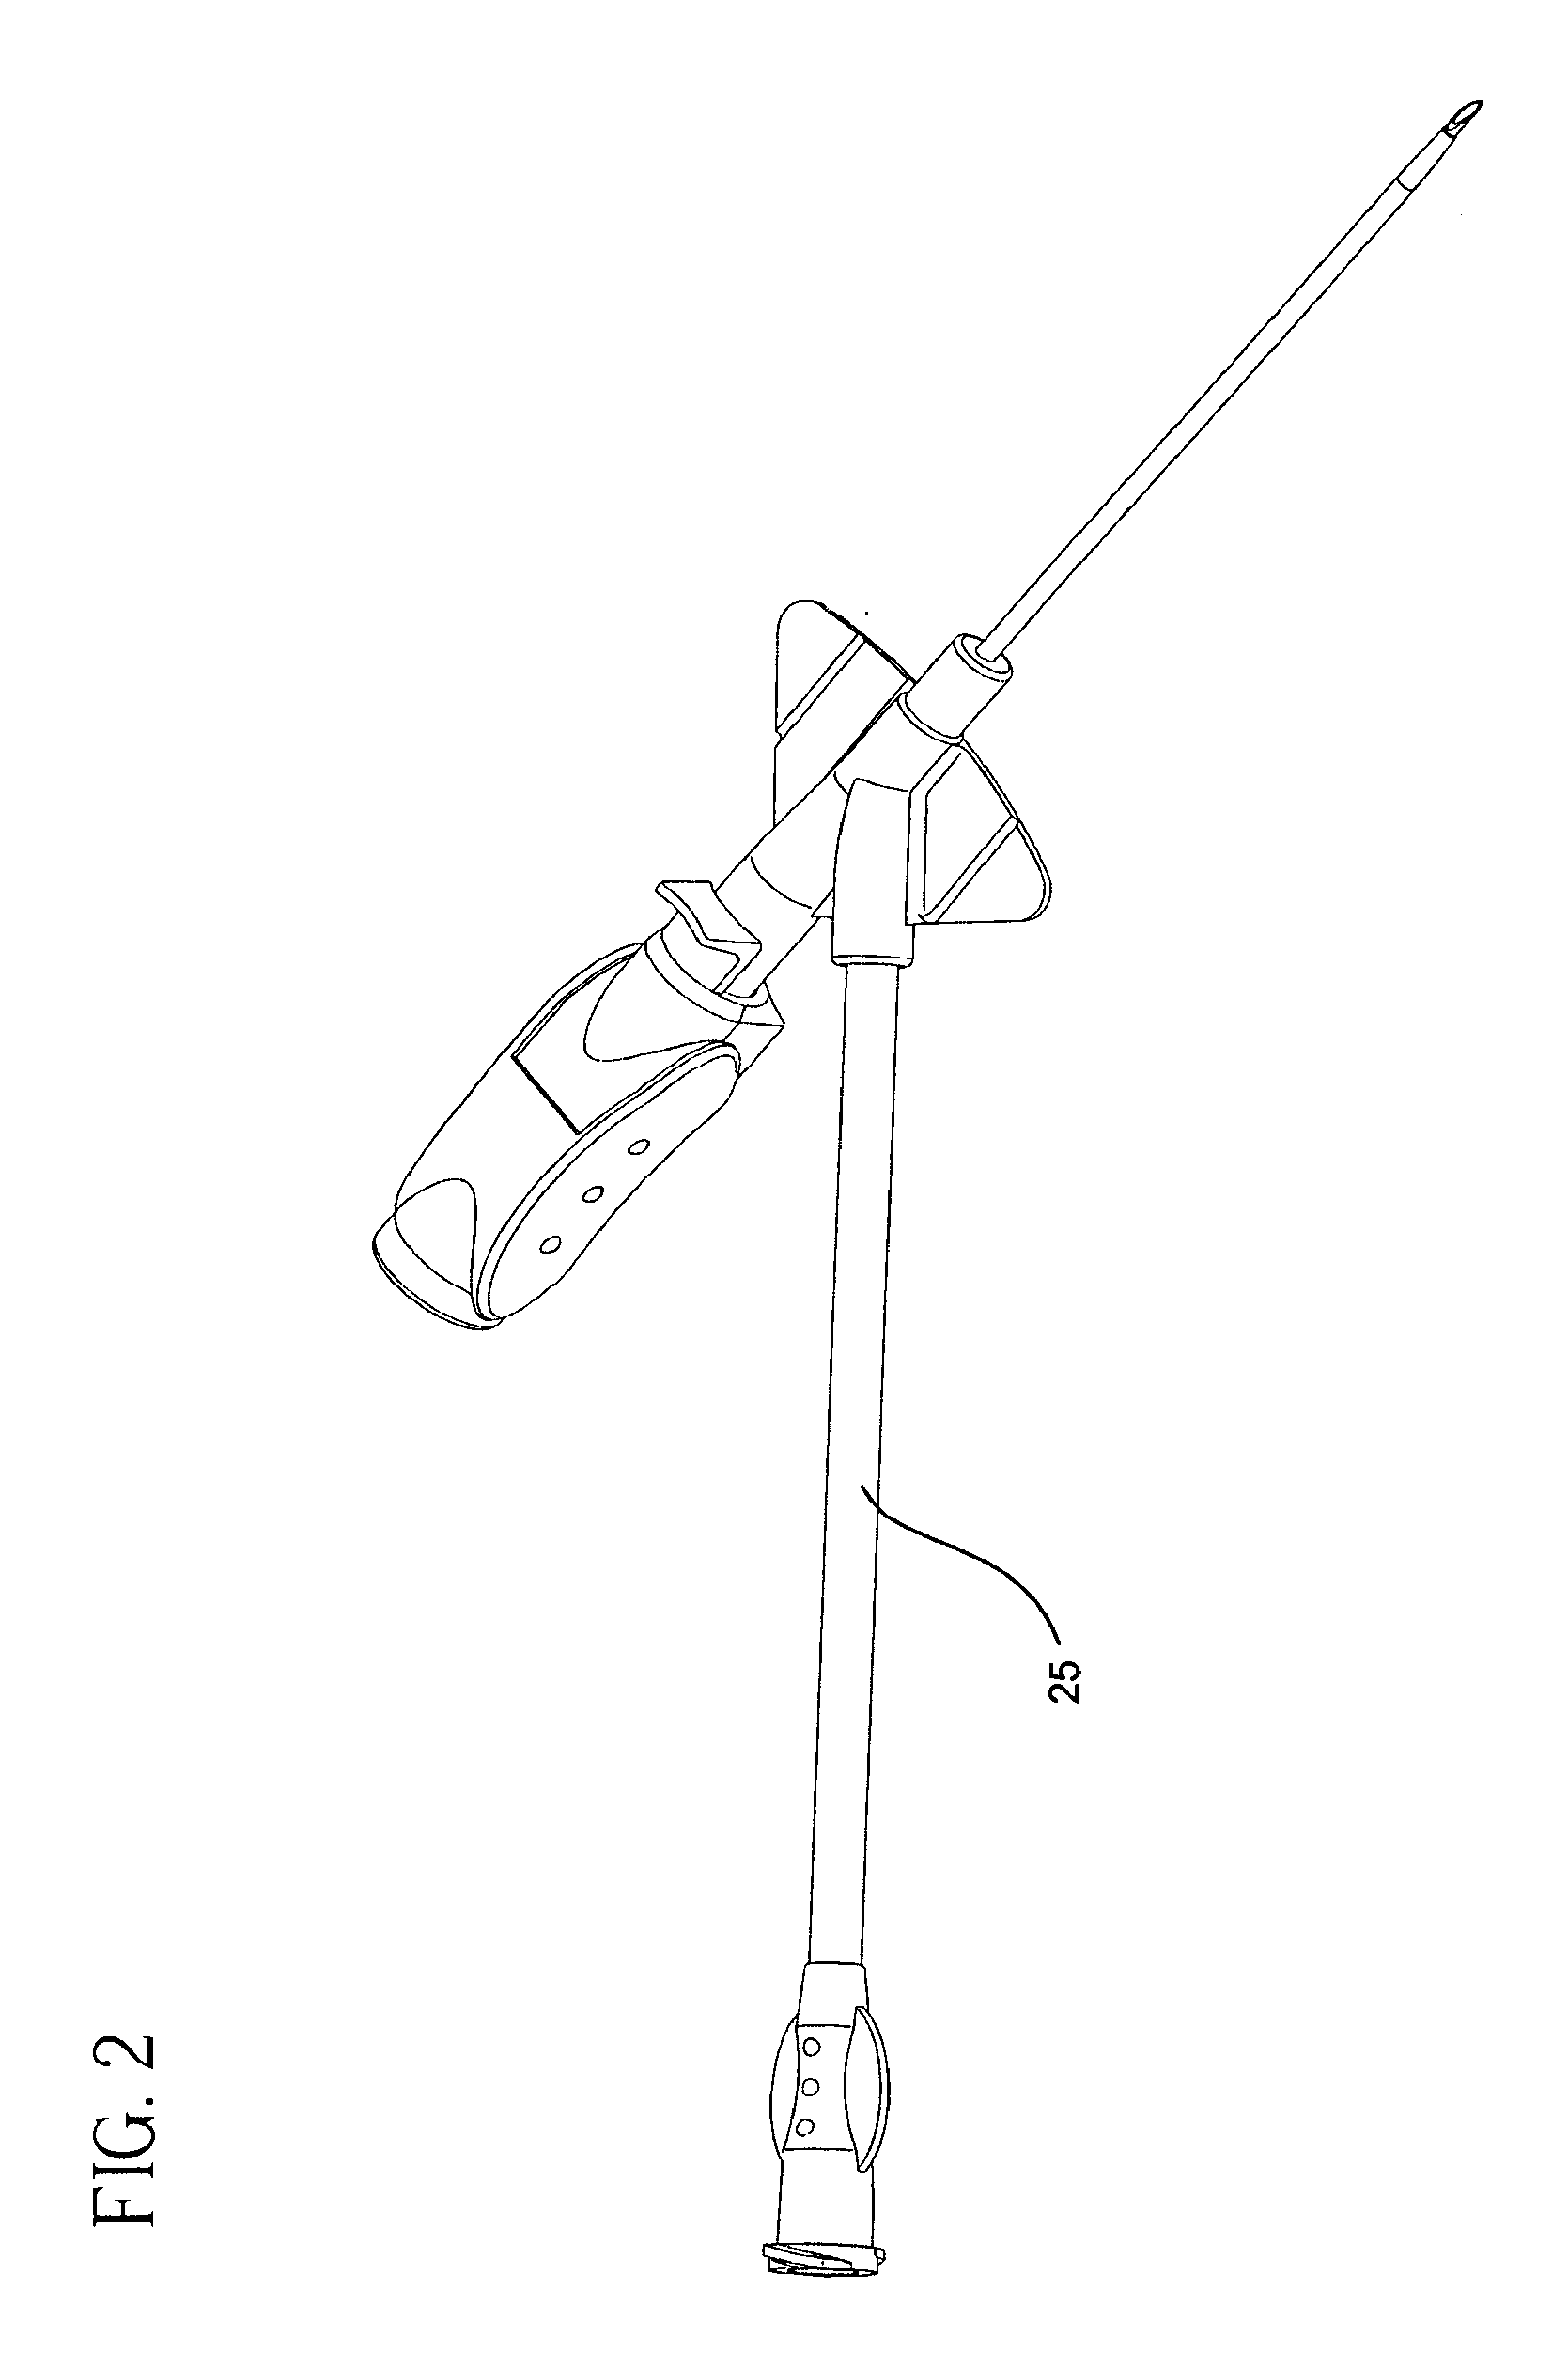 Catheter and Introducer Needle Assembly with Needle Shield